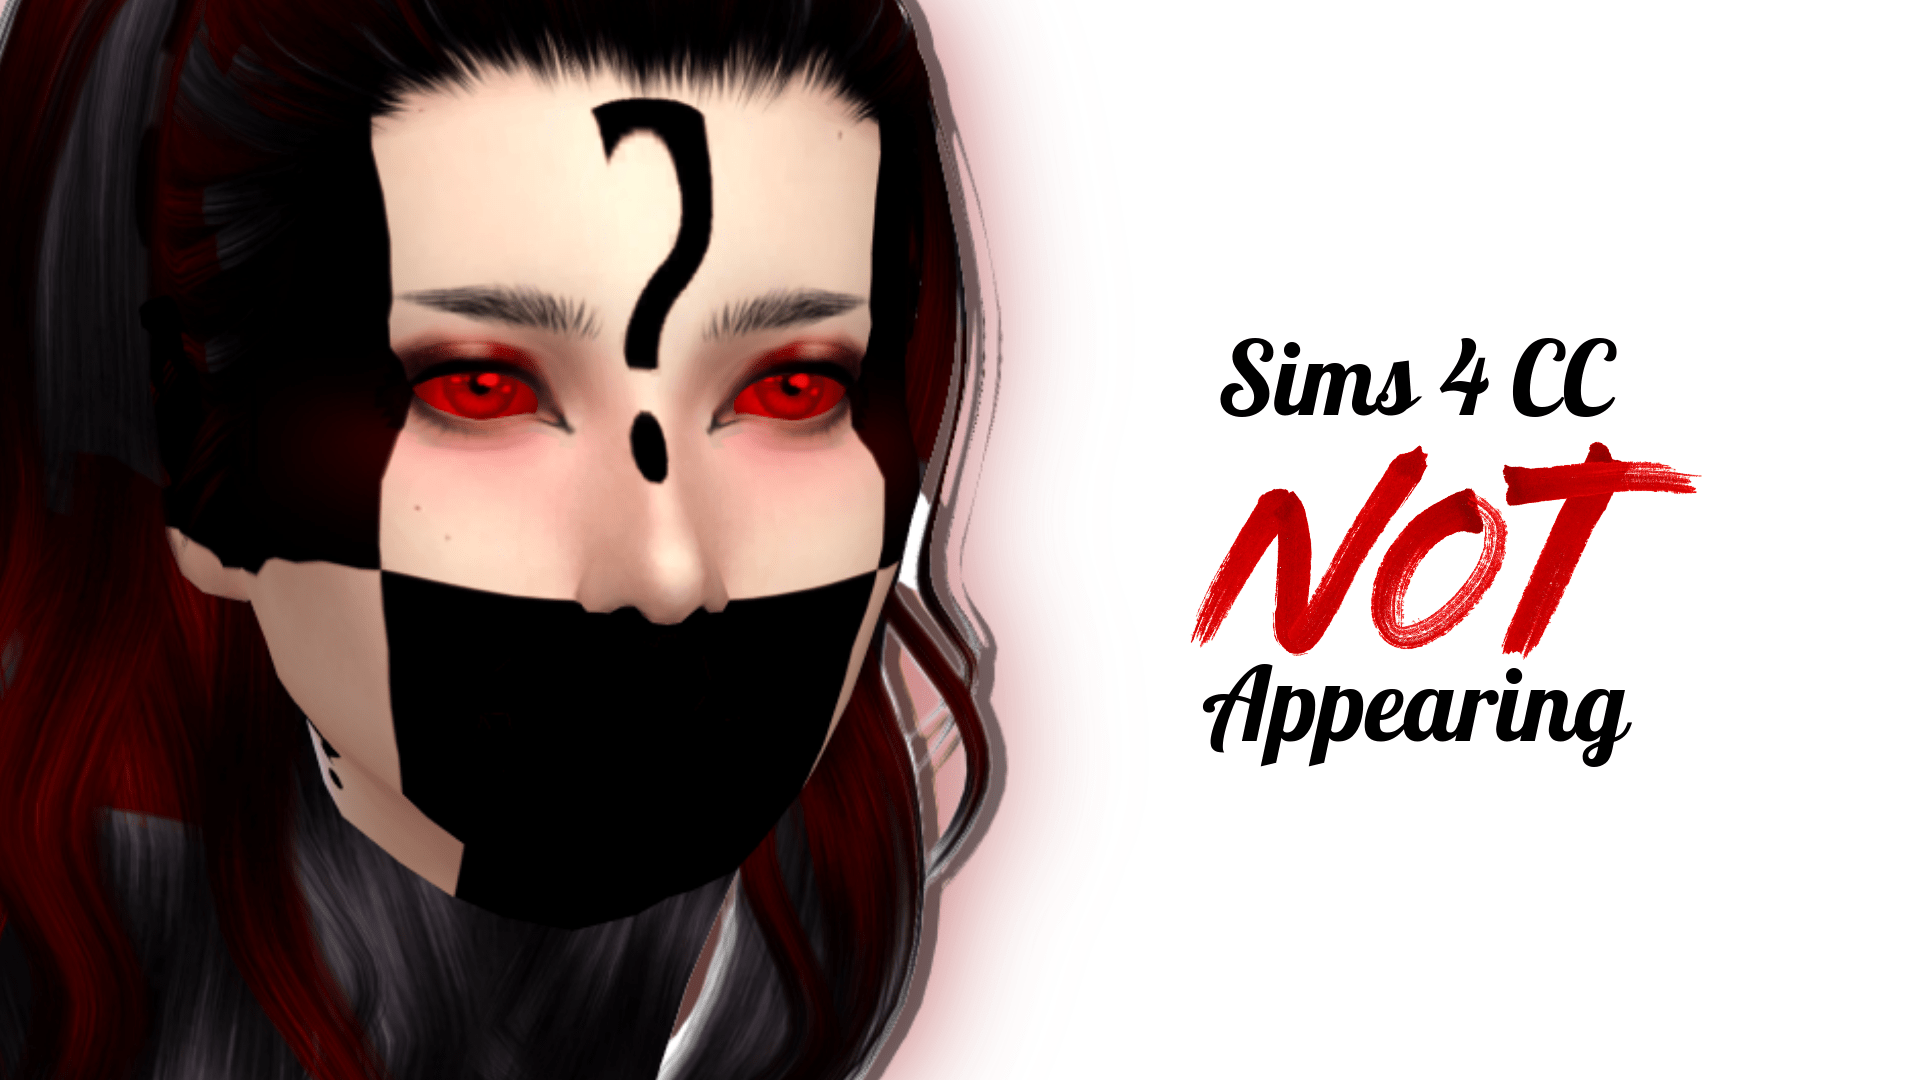 sims 4 news not appearing